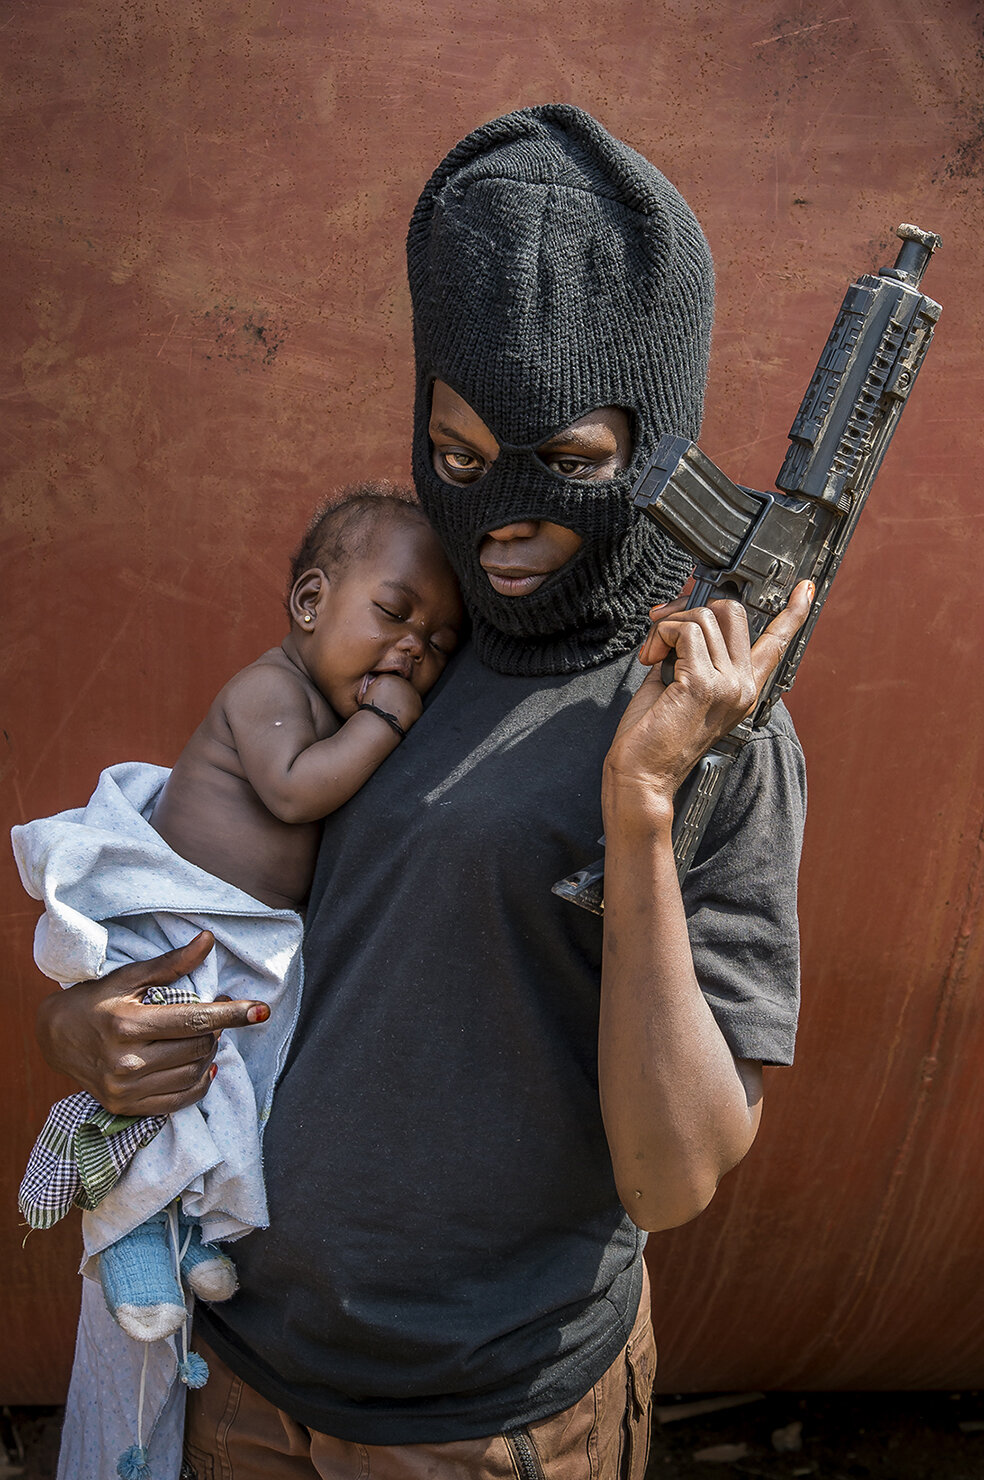  Brenda Nantume, hairdresser to make a living, in hoodlum’s outfit, holds her daughter. She covers about 30 kms to be part of the shooting. 